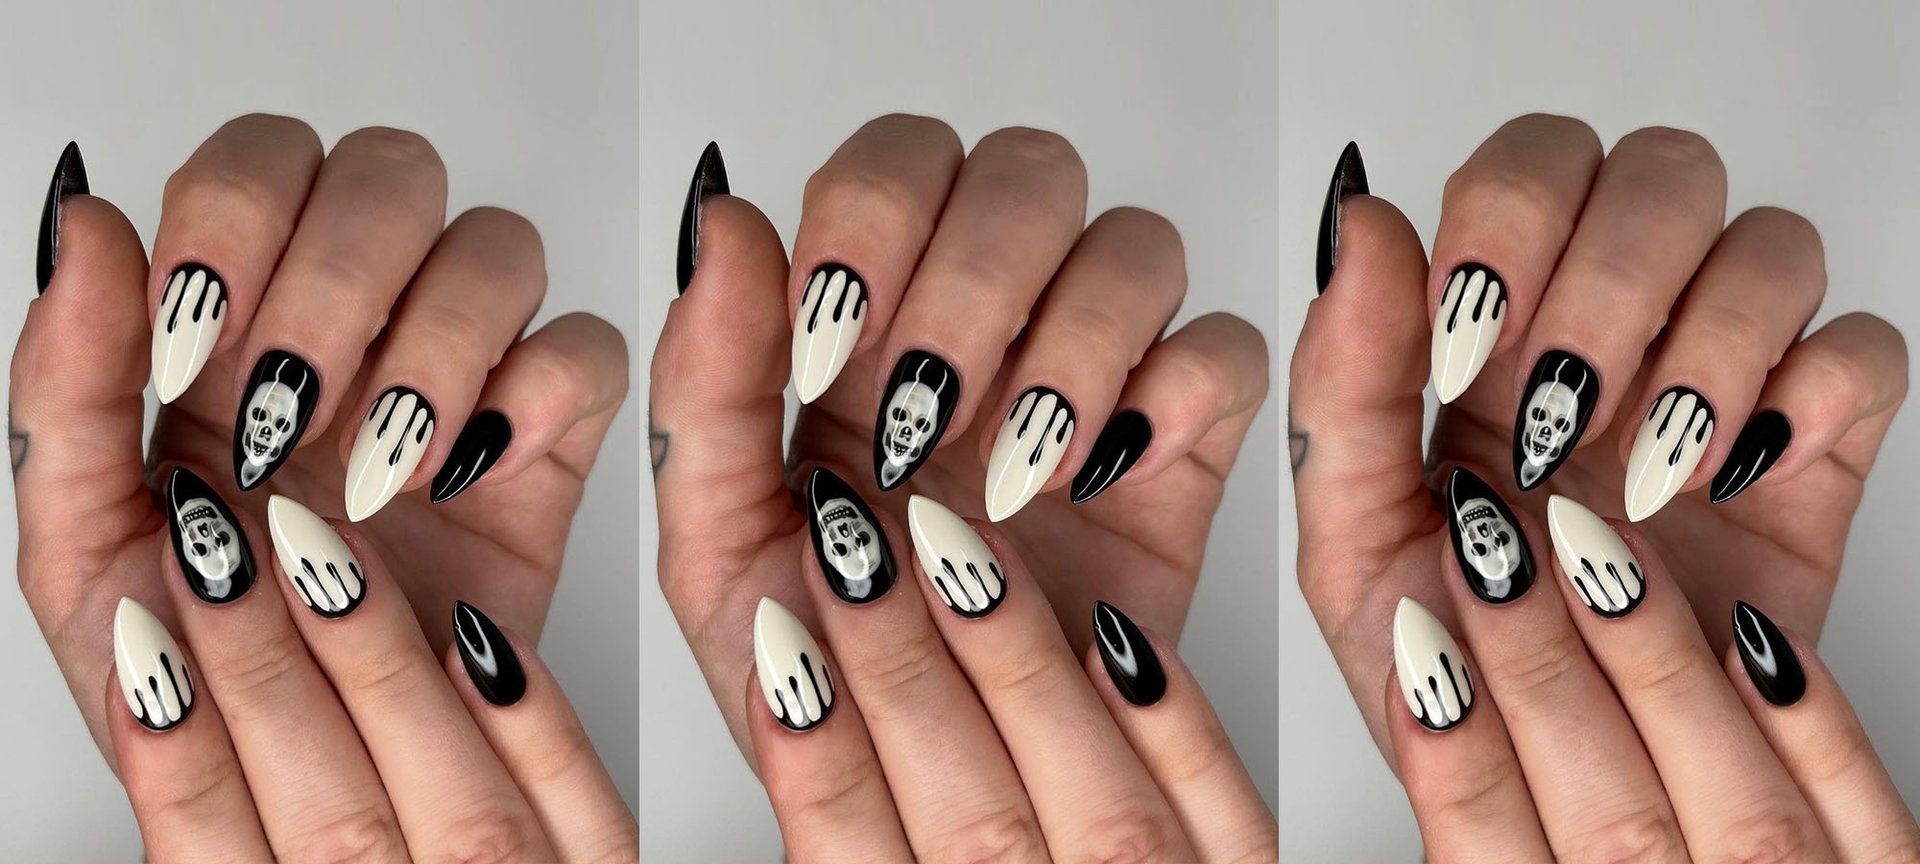 Movie Themed Nail Art Designs - wide 6